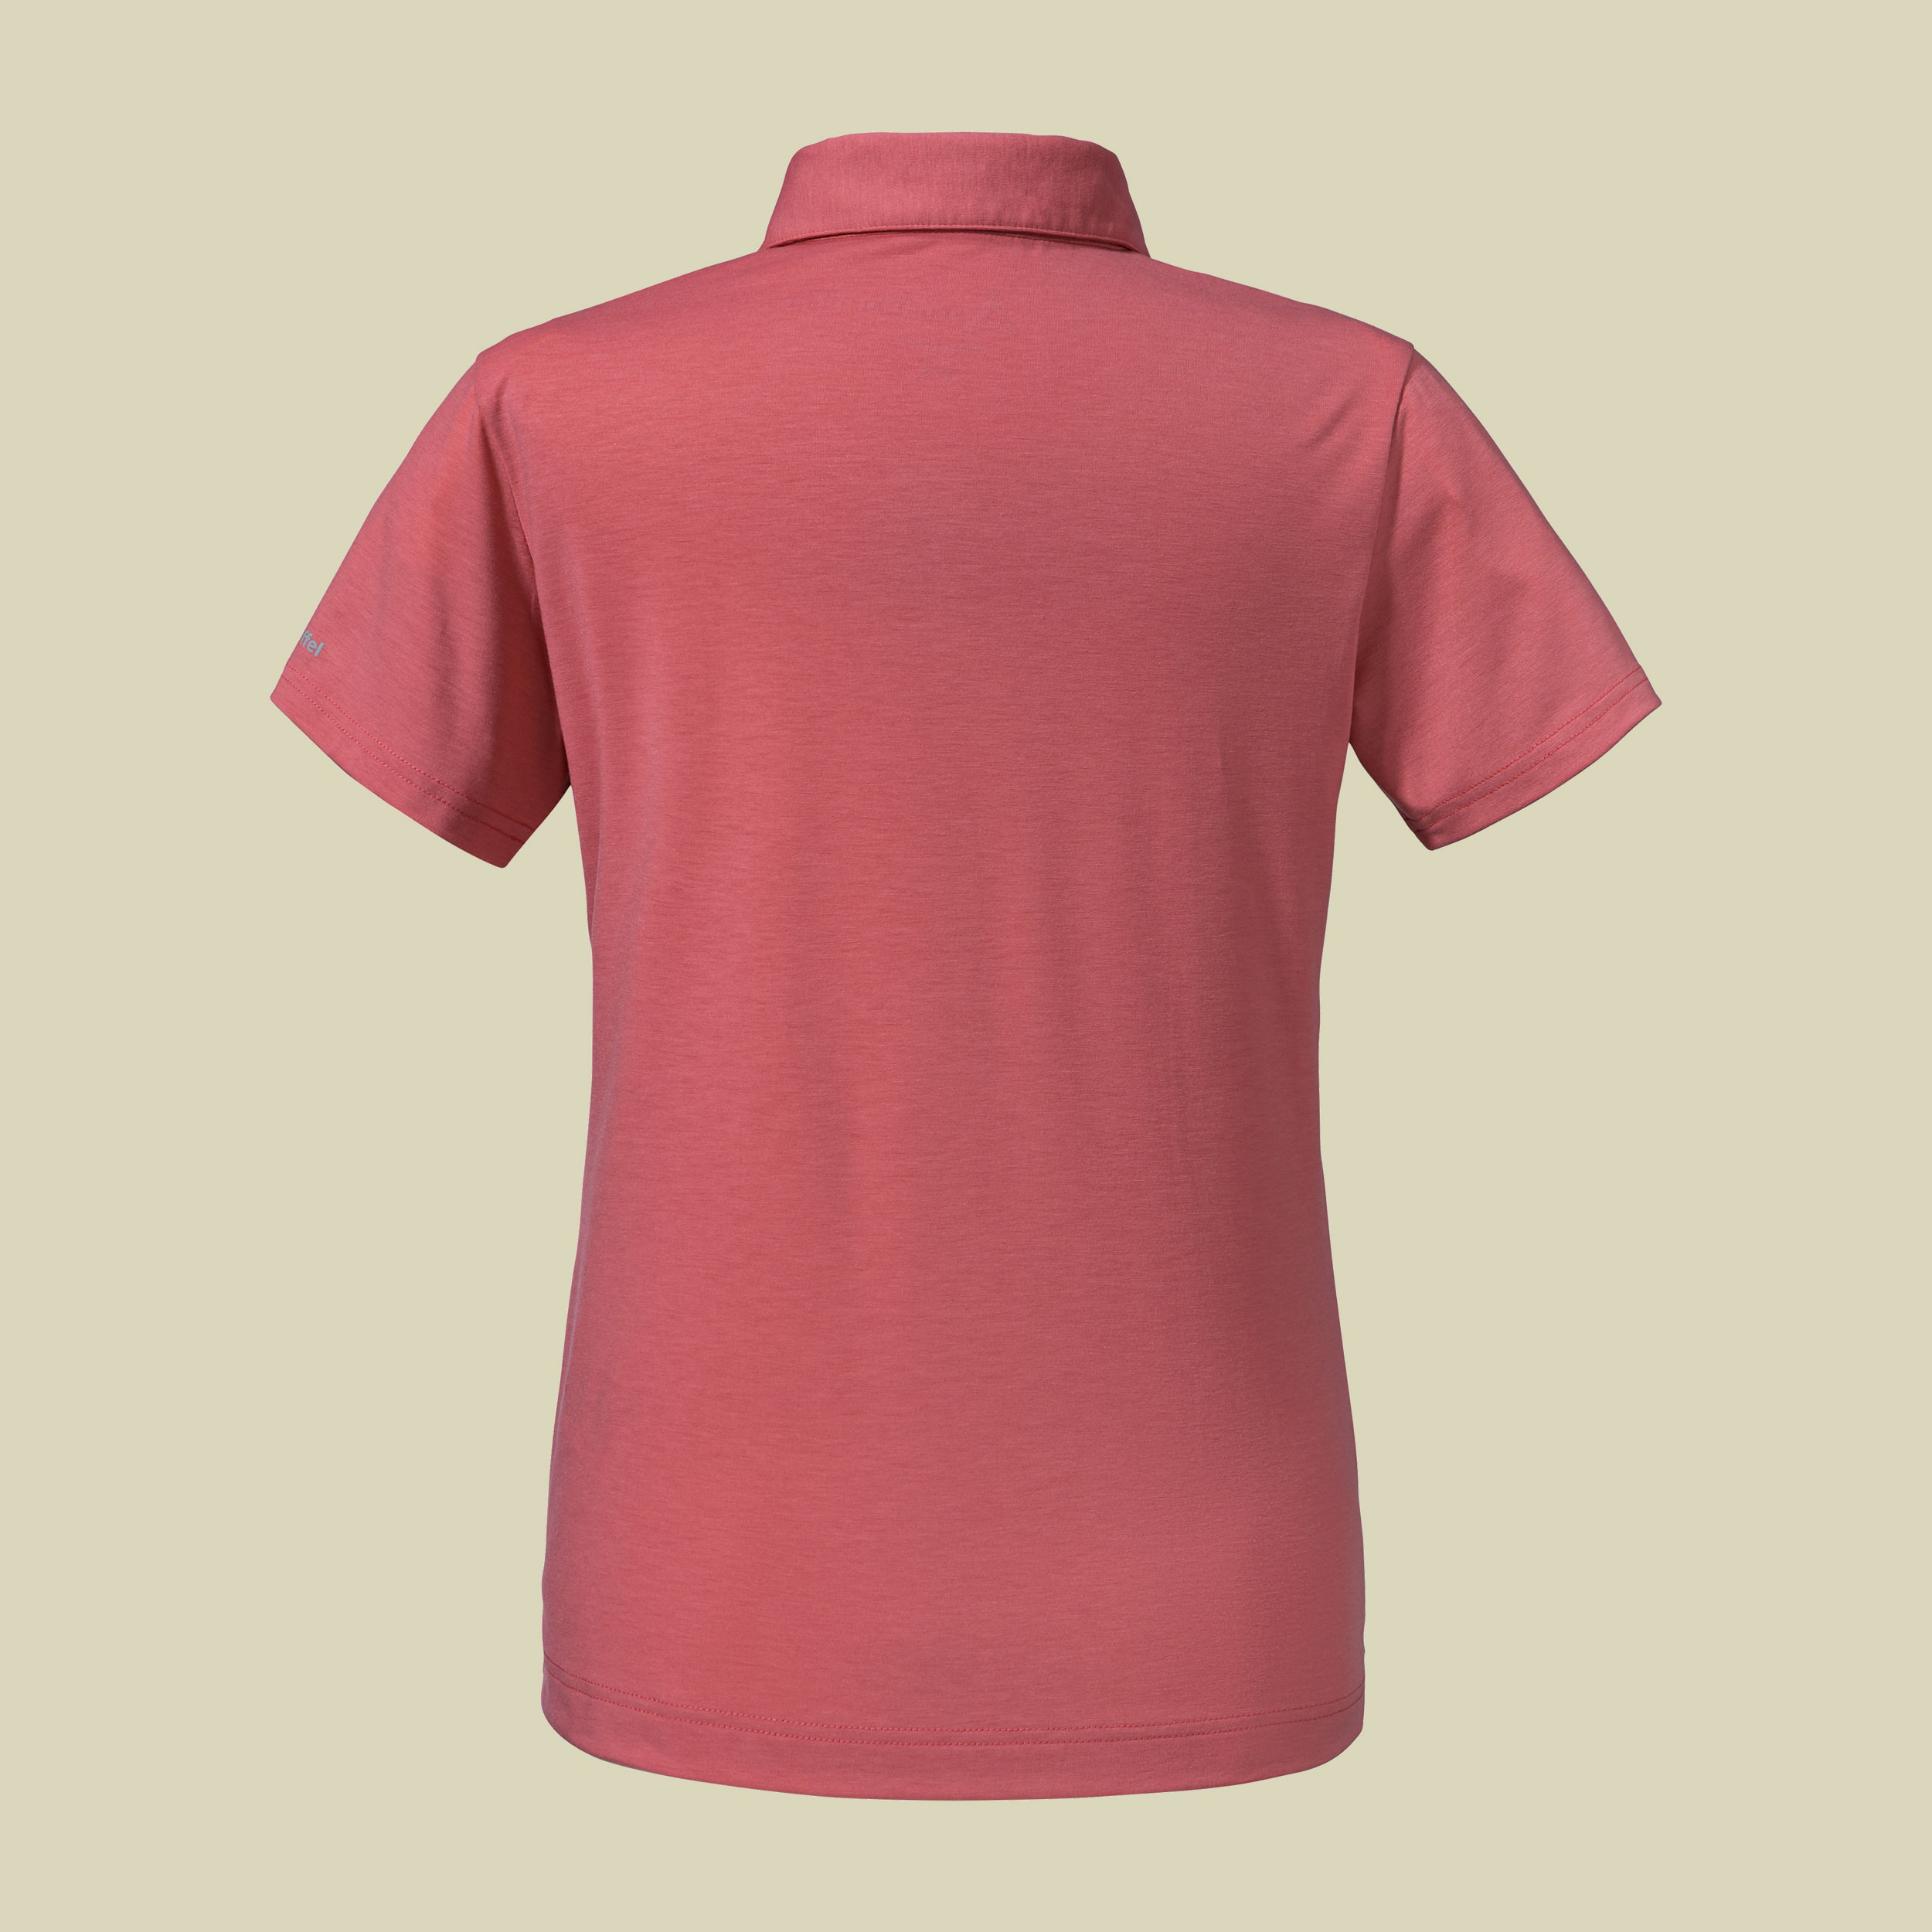 Polo Shirt Ramseck L Women 42 rot - clasping rose